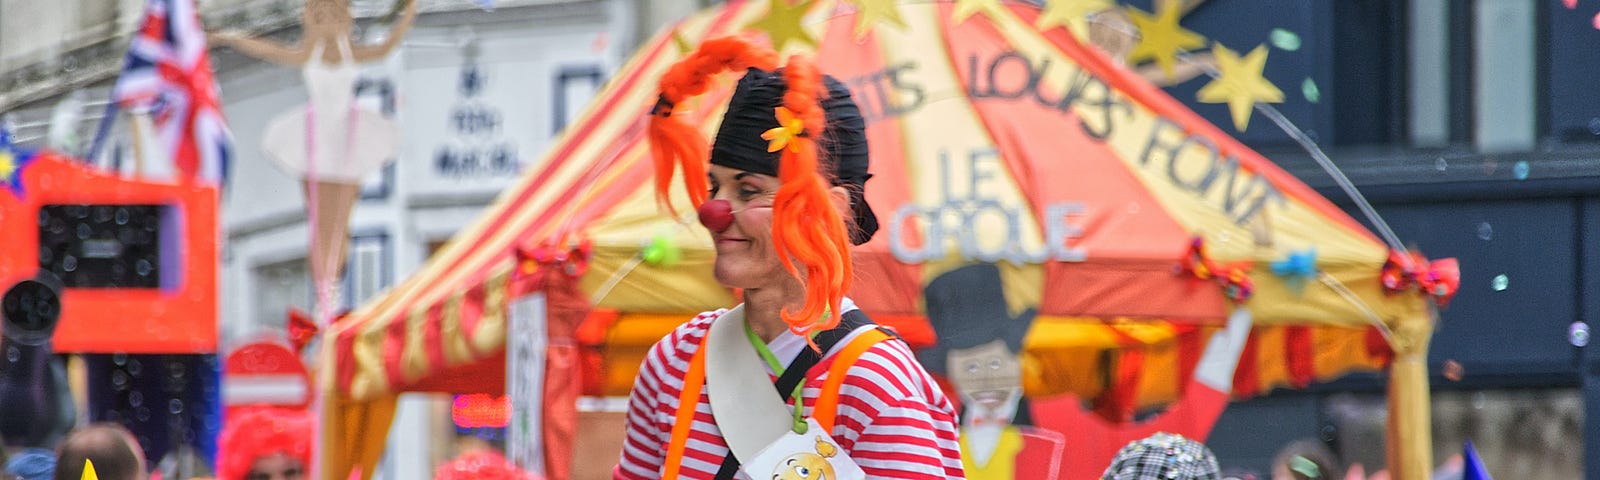 clowns on stilts, sharing joy and love with the world